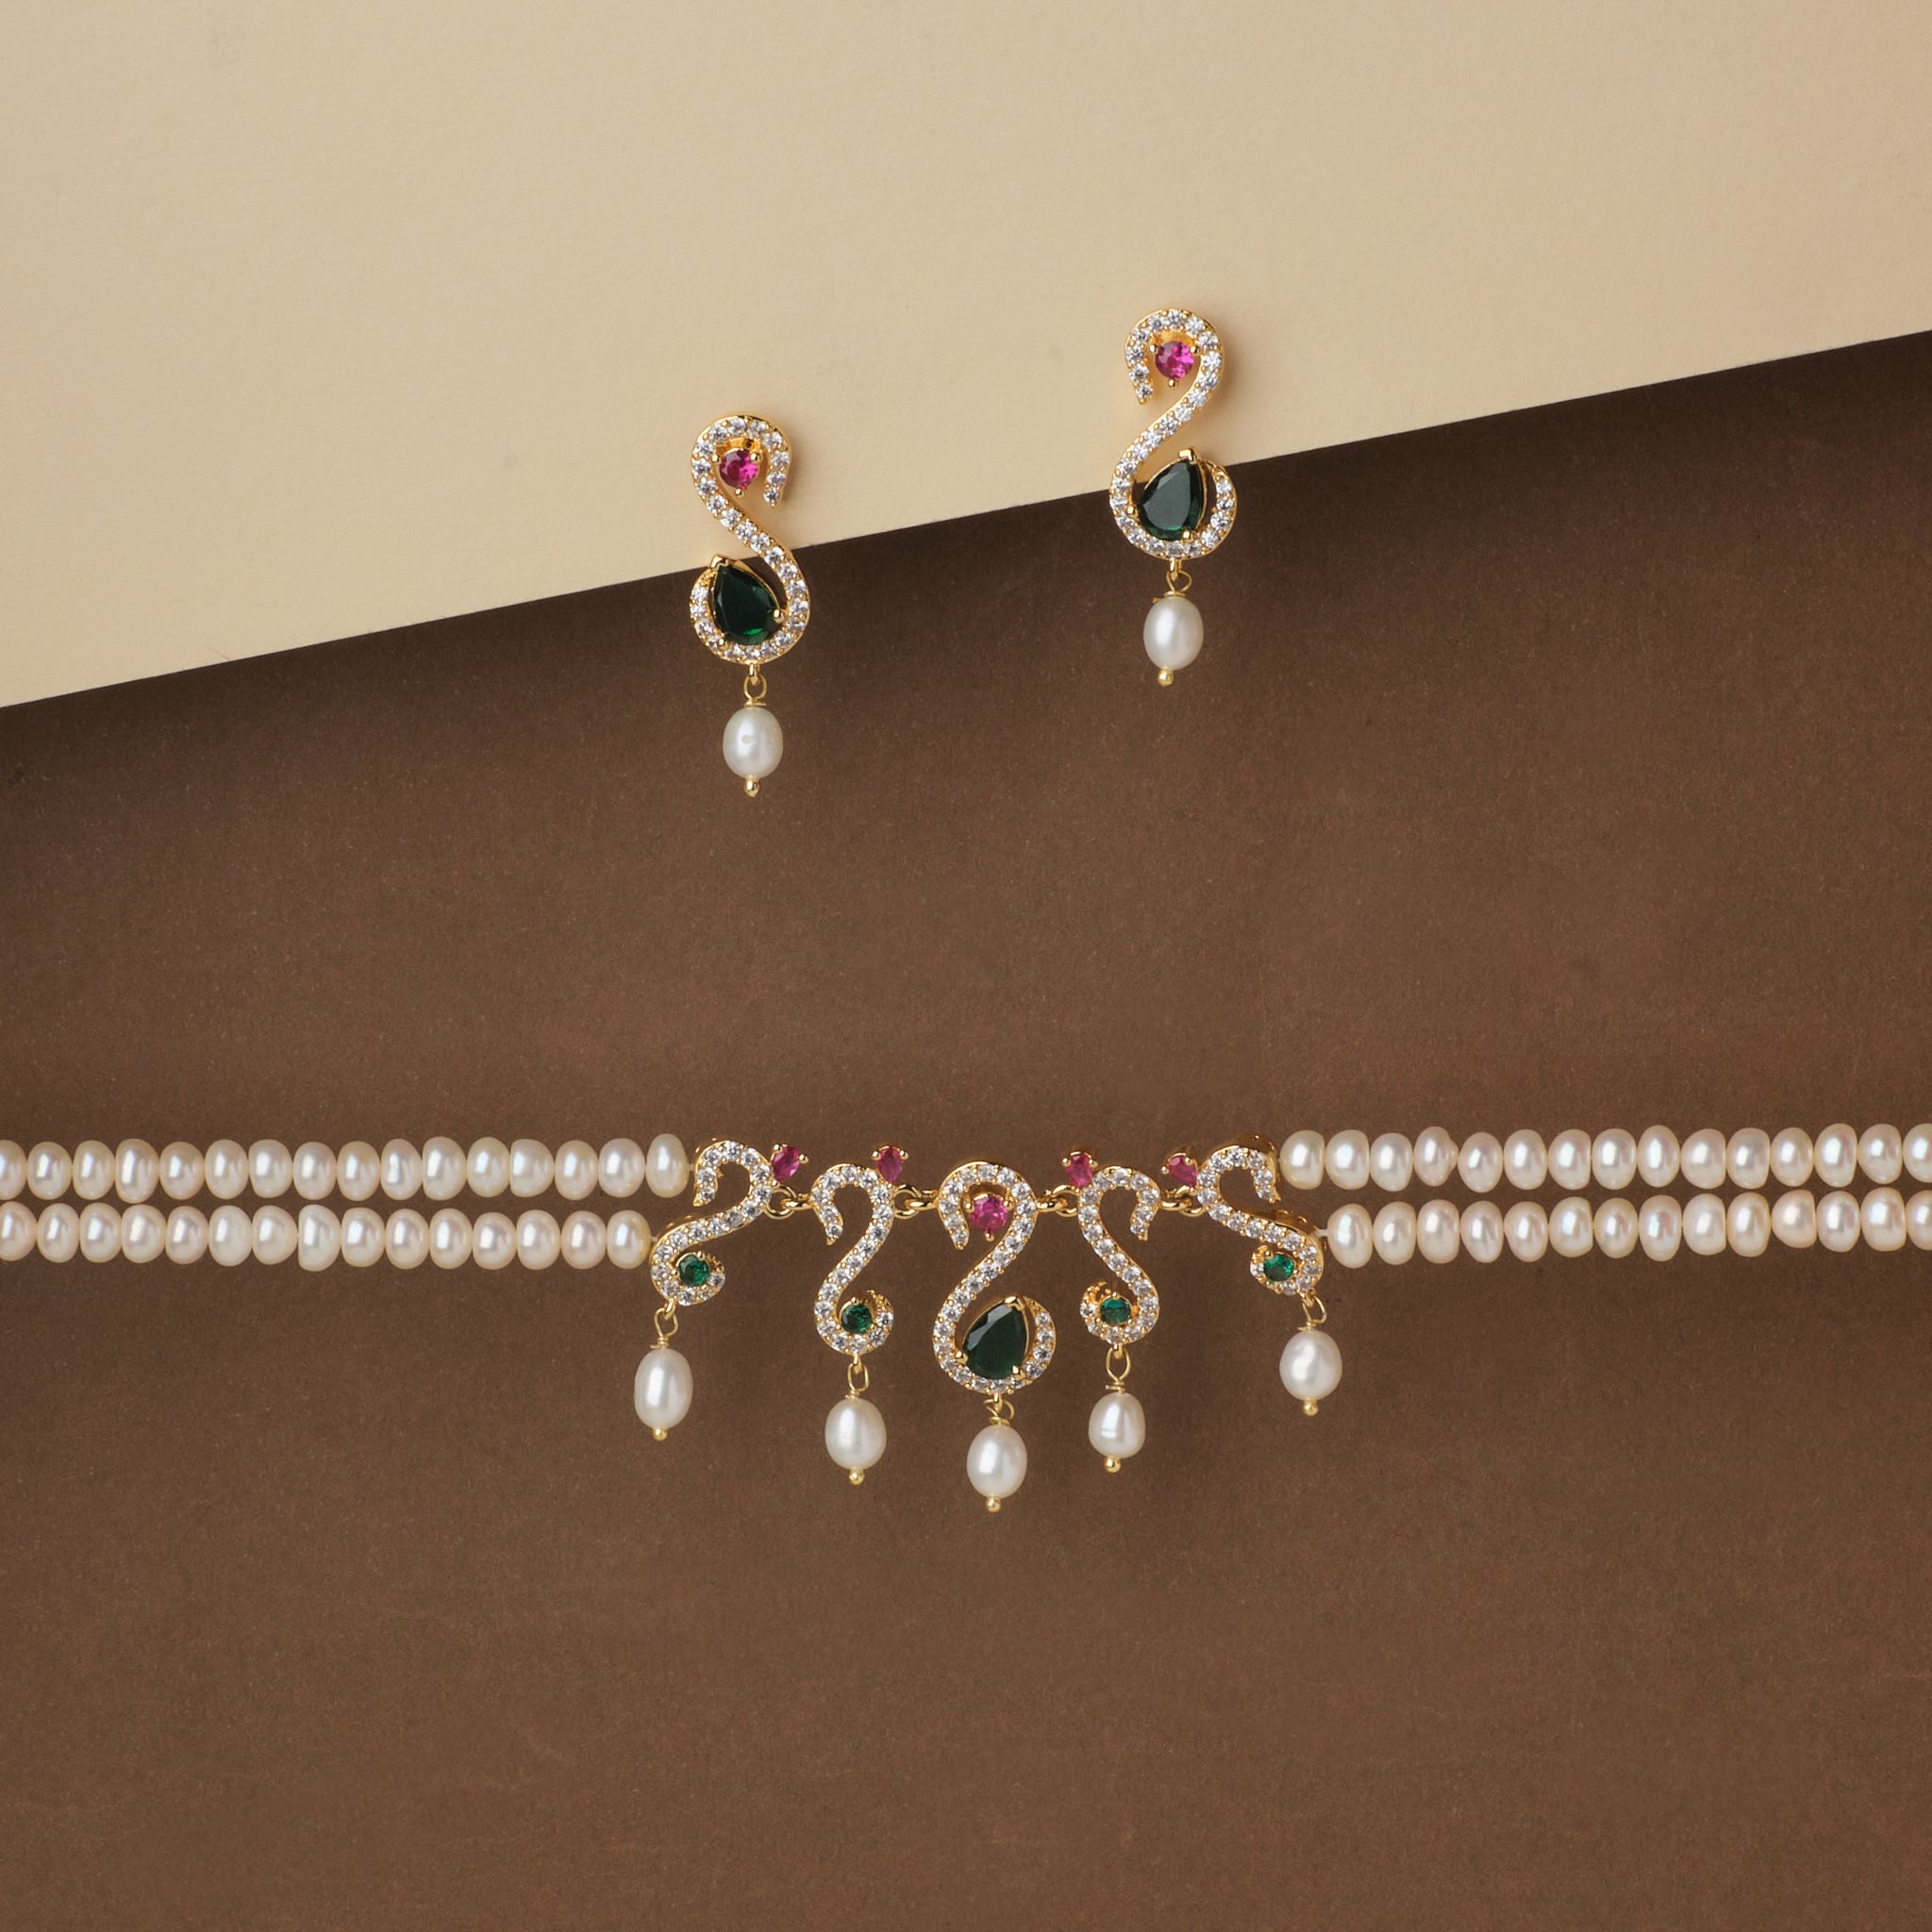 Elegant Ravishing Multi Stone Pearl Necklace Set and matching earrings with gemstone accents displayed on a two-tone backdrop by Chandrani Pearls.